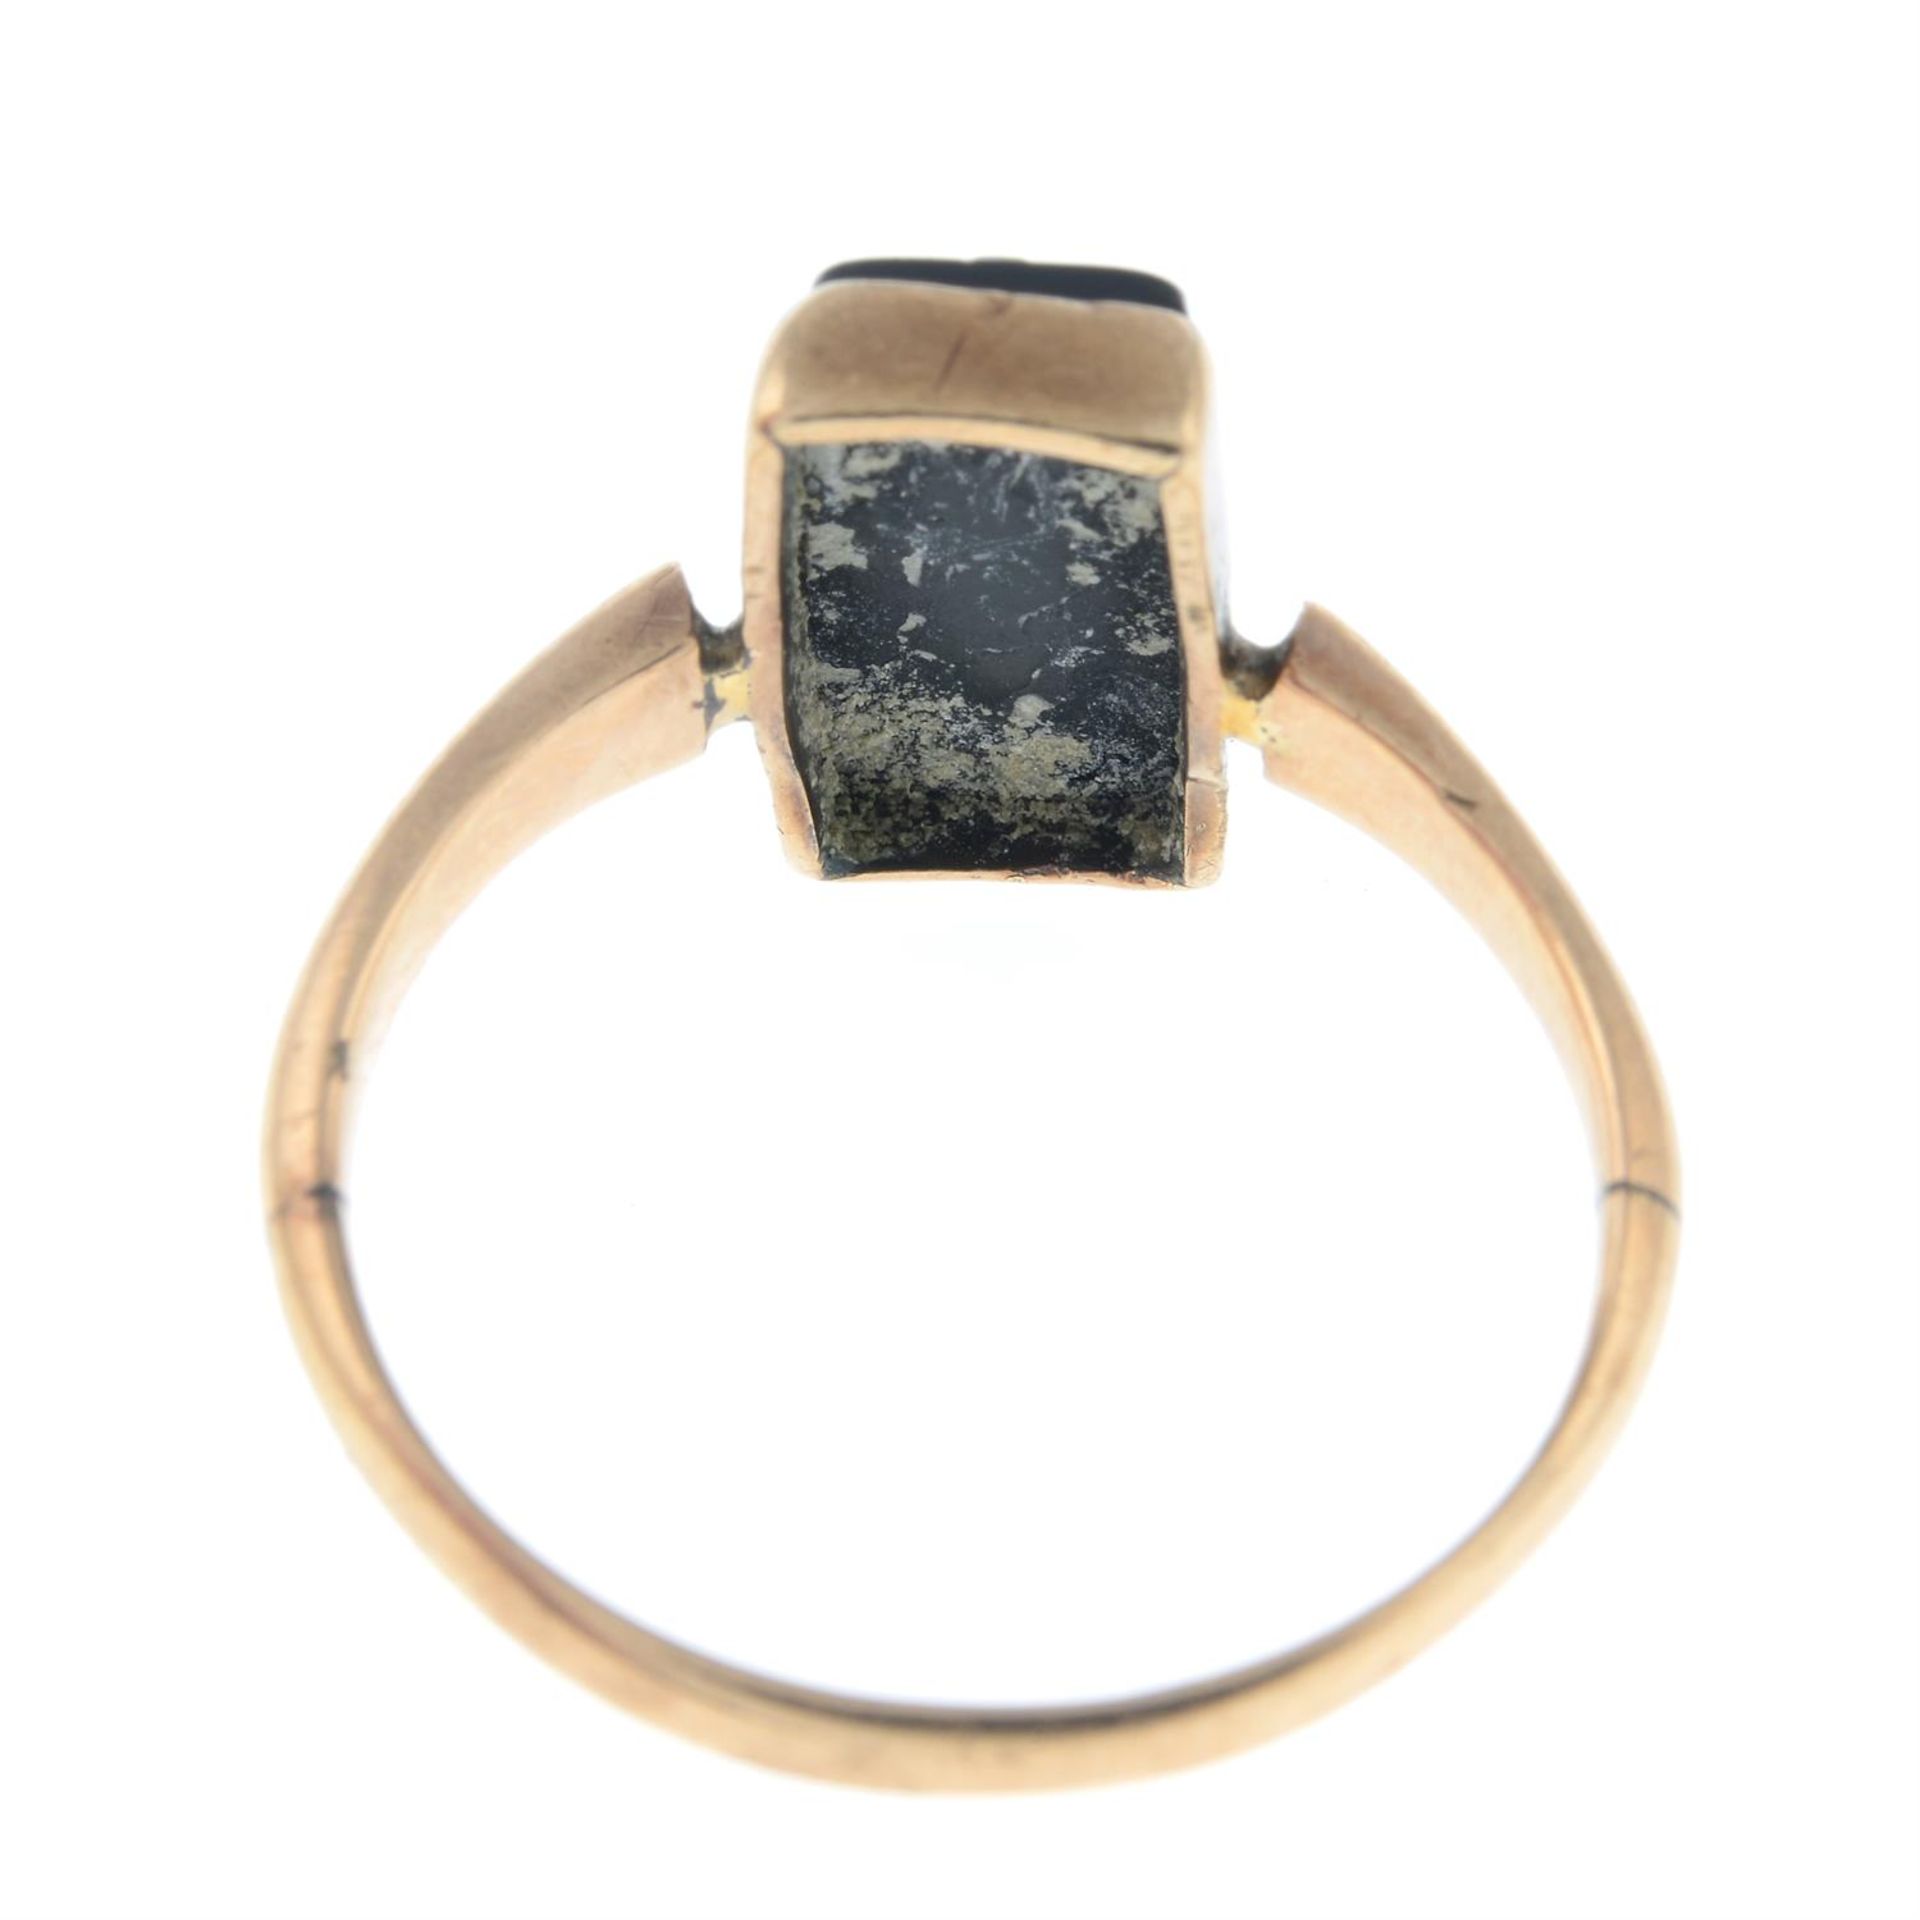 An early 20th century gold banded onyx cameo ring, possibly carved to depict one of the muses. - Image 2 of 2